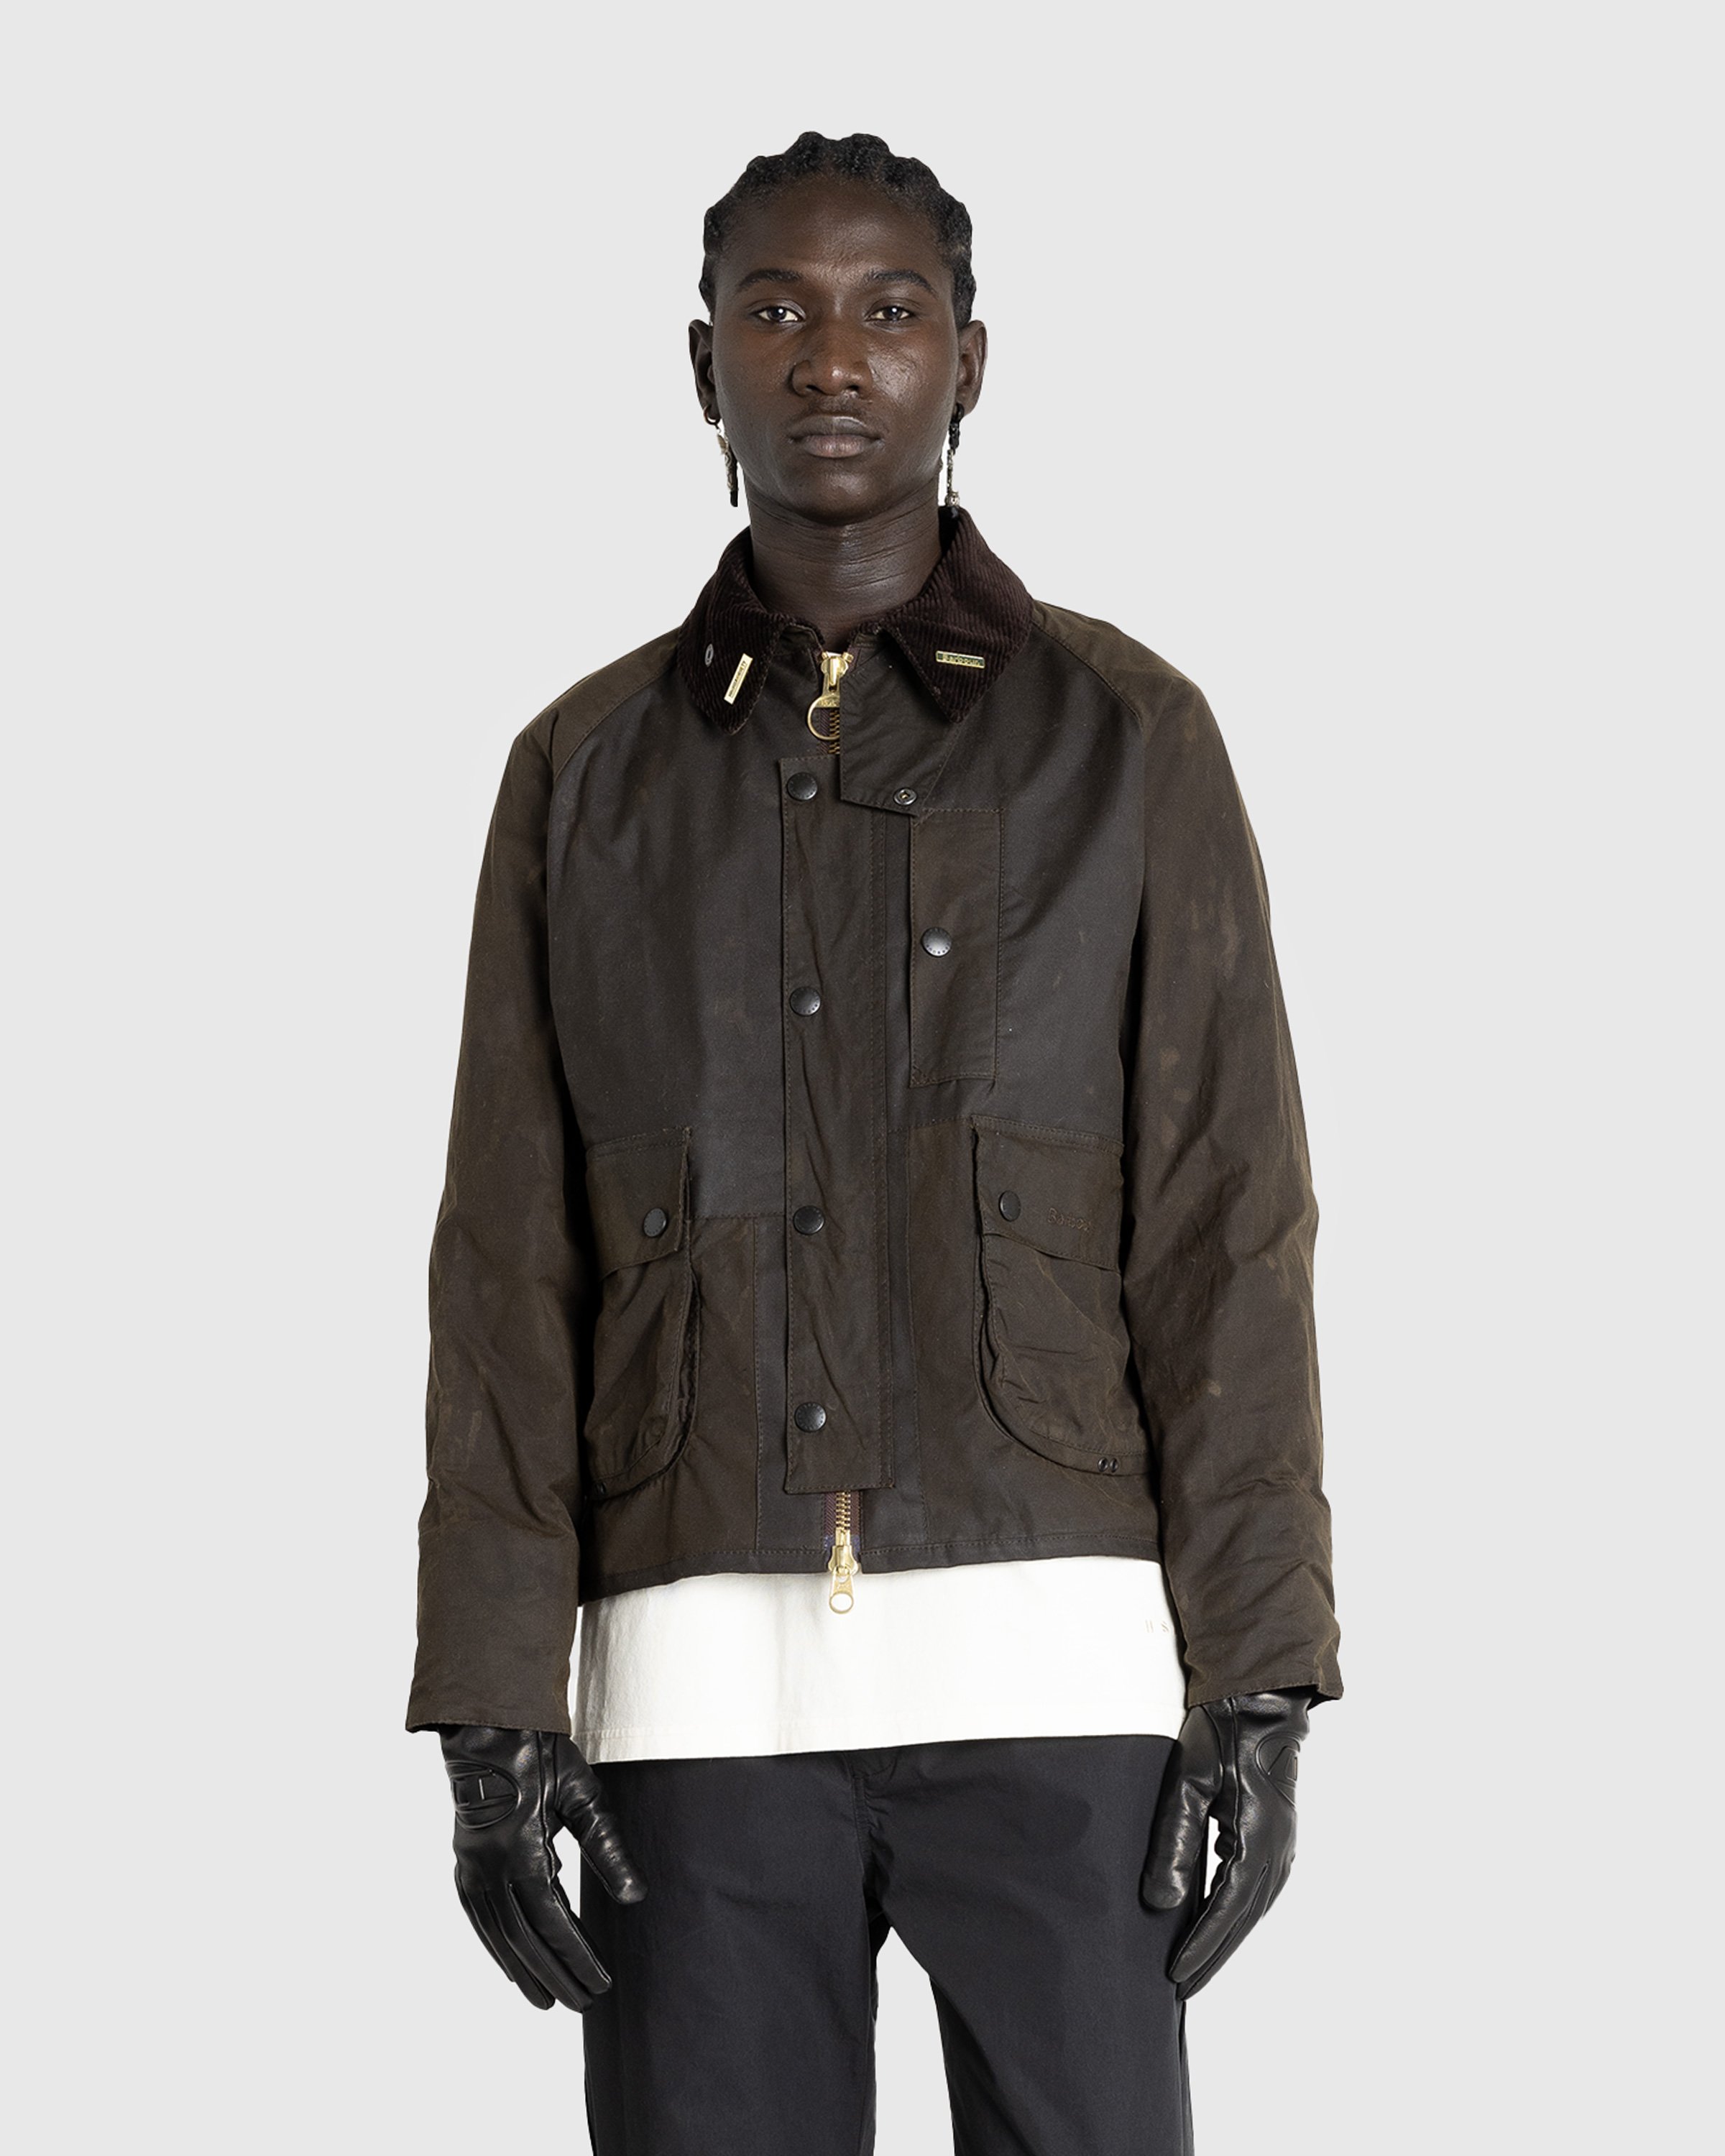 Barbour x Highsnobiety - Re-Loved Cropped Bedale Jacket 1 - 36 - Grey-Black - Clothing - Olive - Image 5